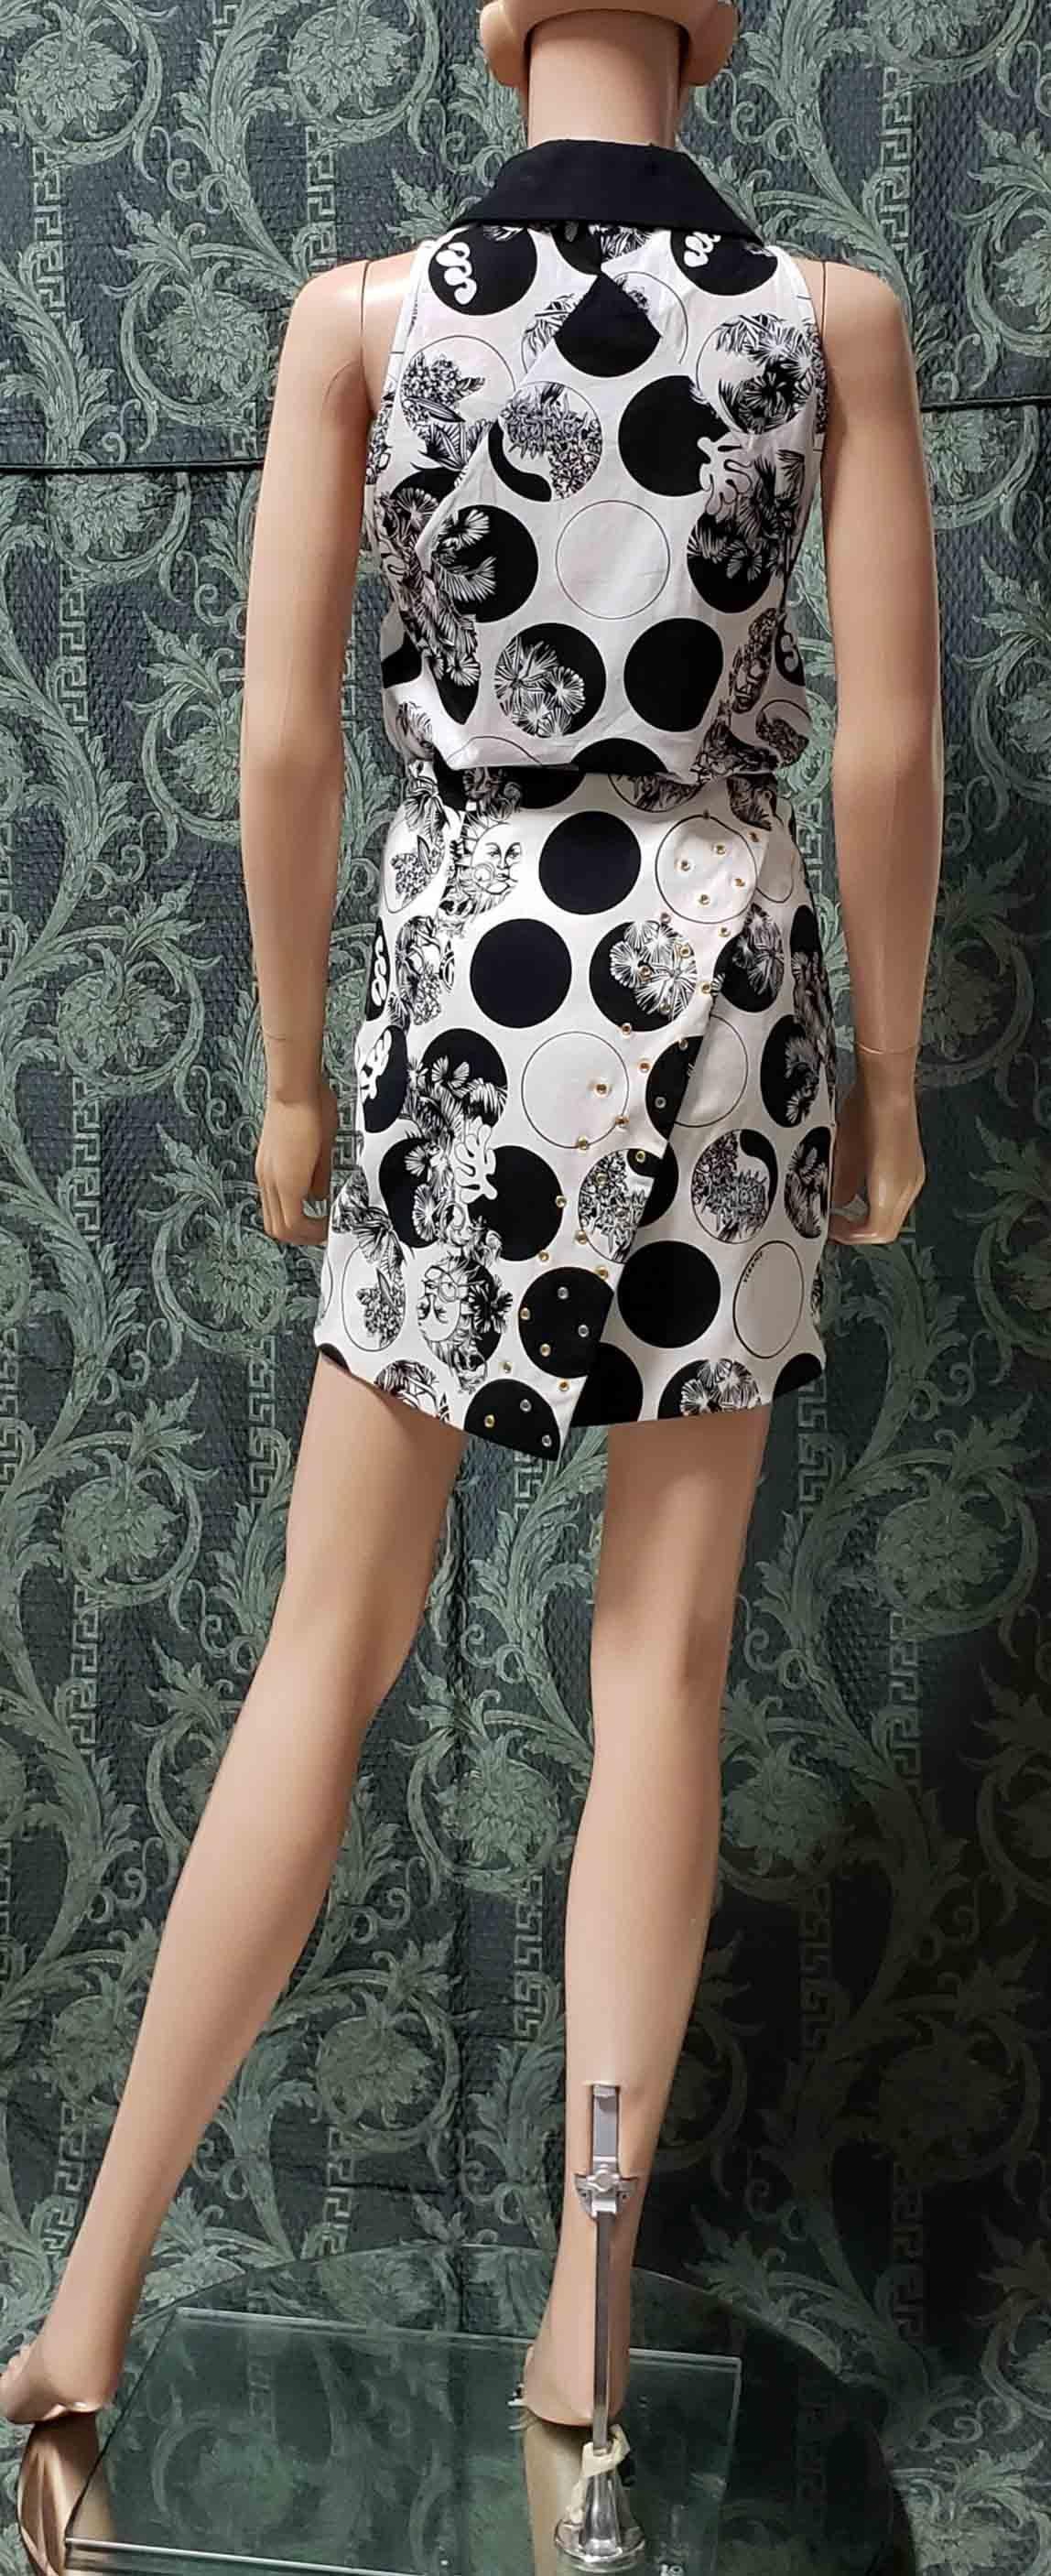 Resort 2012 Look # 4 NEW VERSACE FLORAL BLACK and WHITE COTTON SKIRT SUIT 38 - 2 For Sale 3